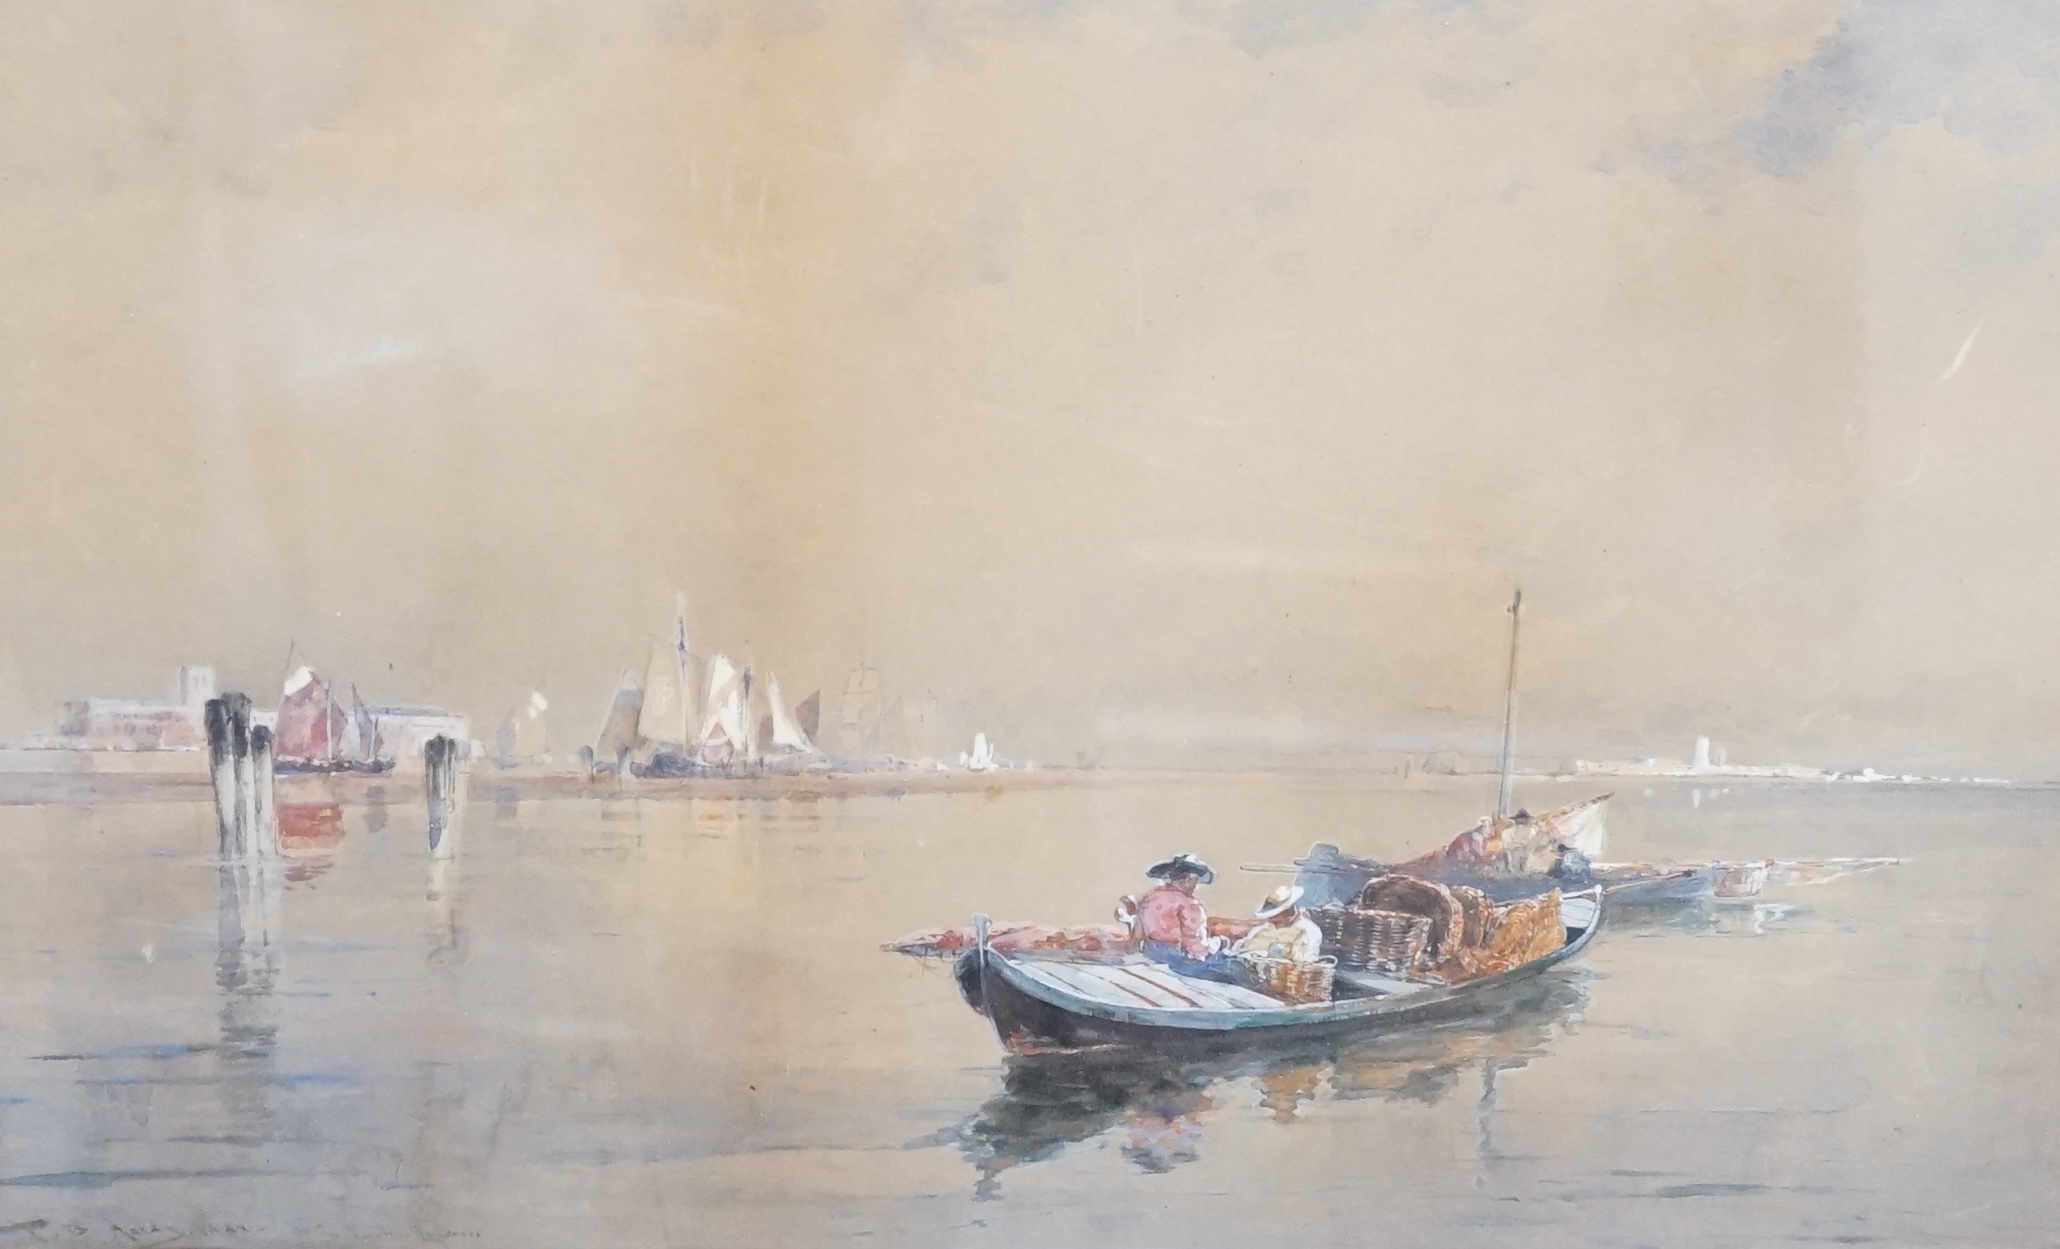 Thomas Bush Hardy (1842-1897), heightened watercolour, Boats at sea, signed, 27 x 42cm. Condition - poor, discolouration and staining to the paper commensurate with age